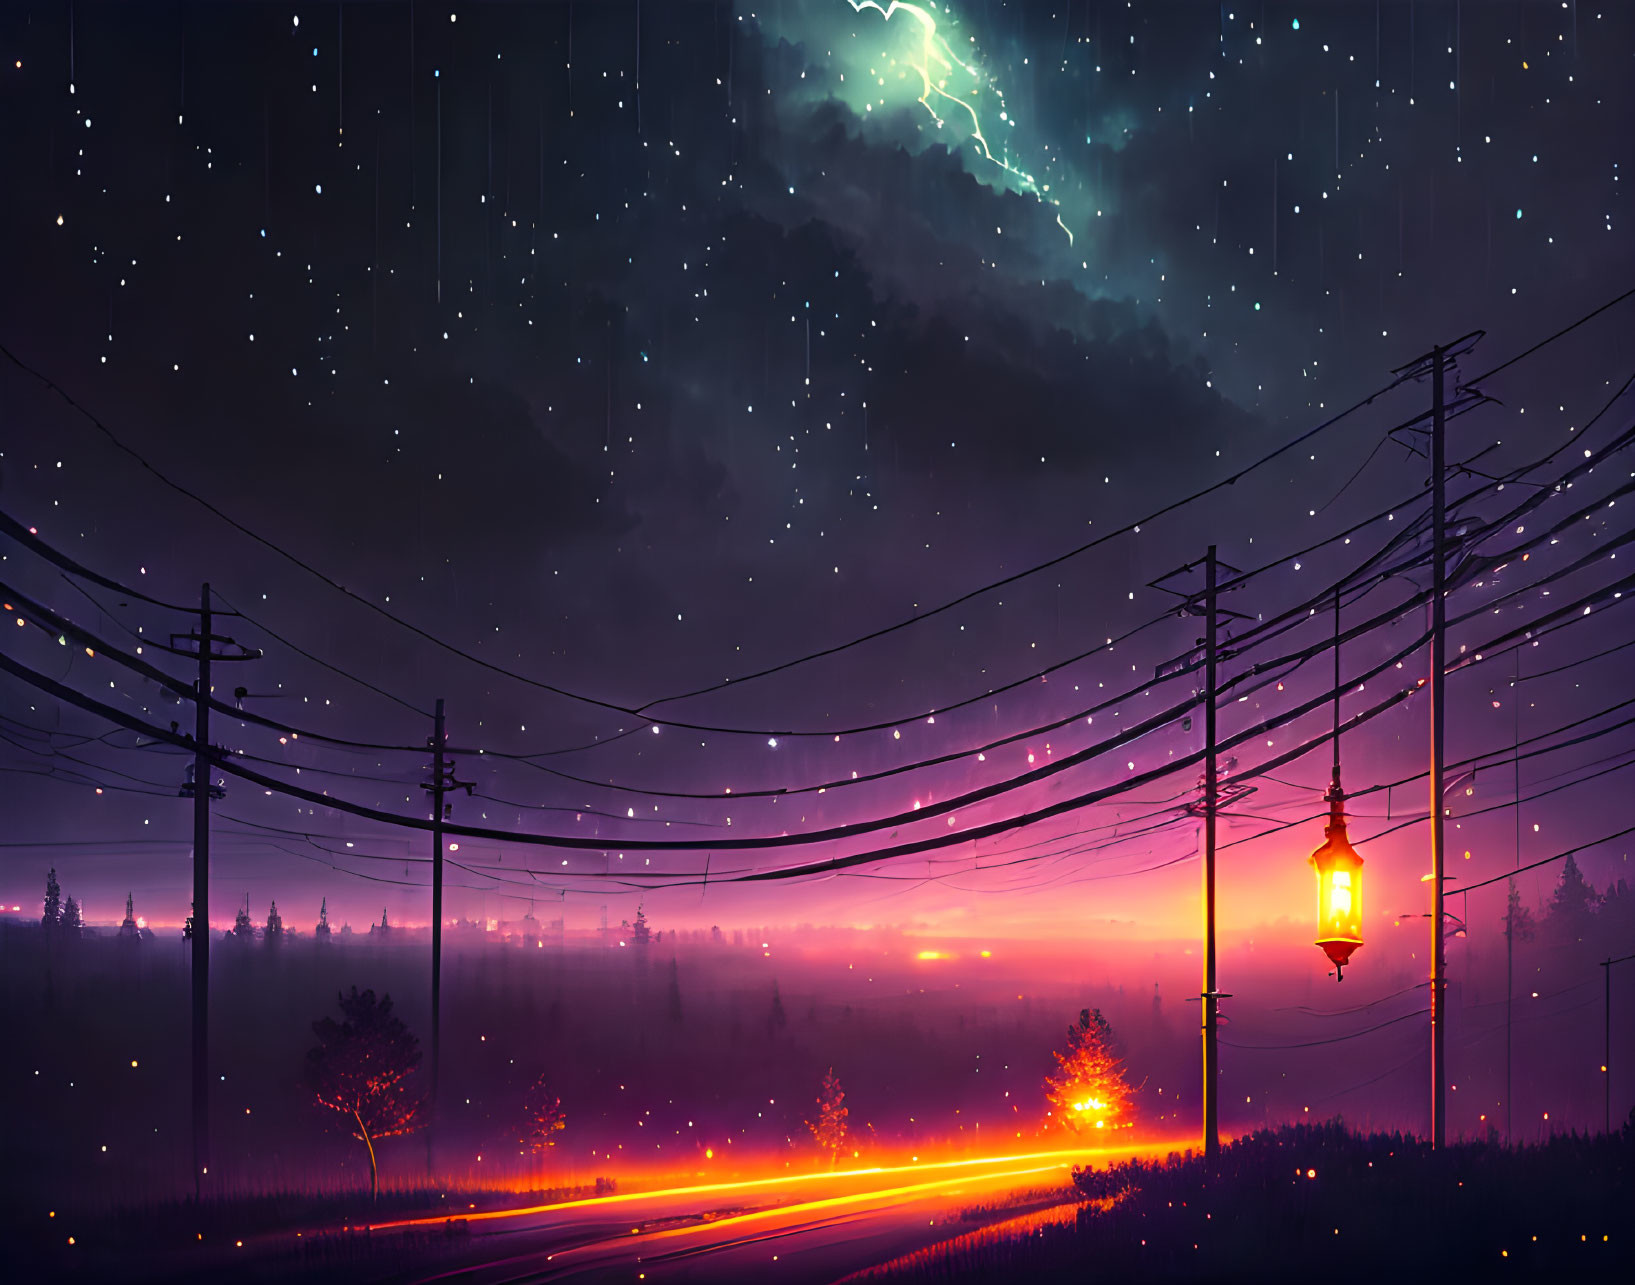 Vibrant night scene with streaking stars, purple sky, glowing lamp, and light trails.